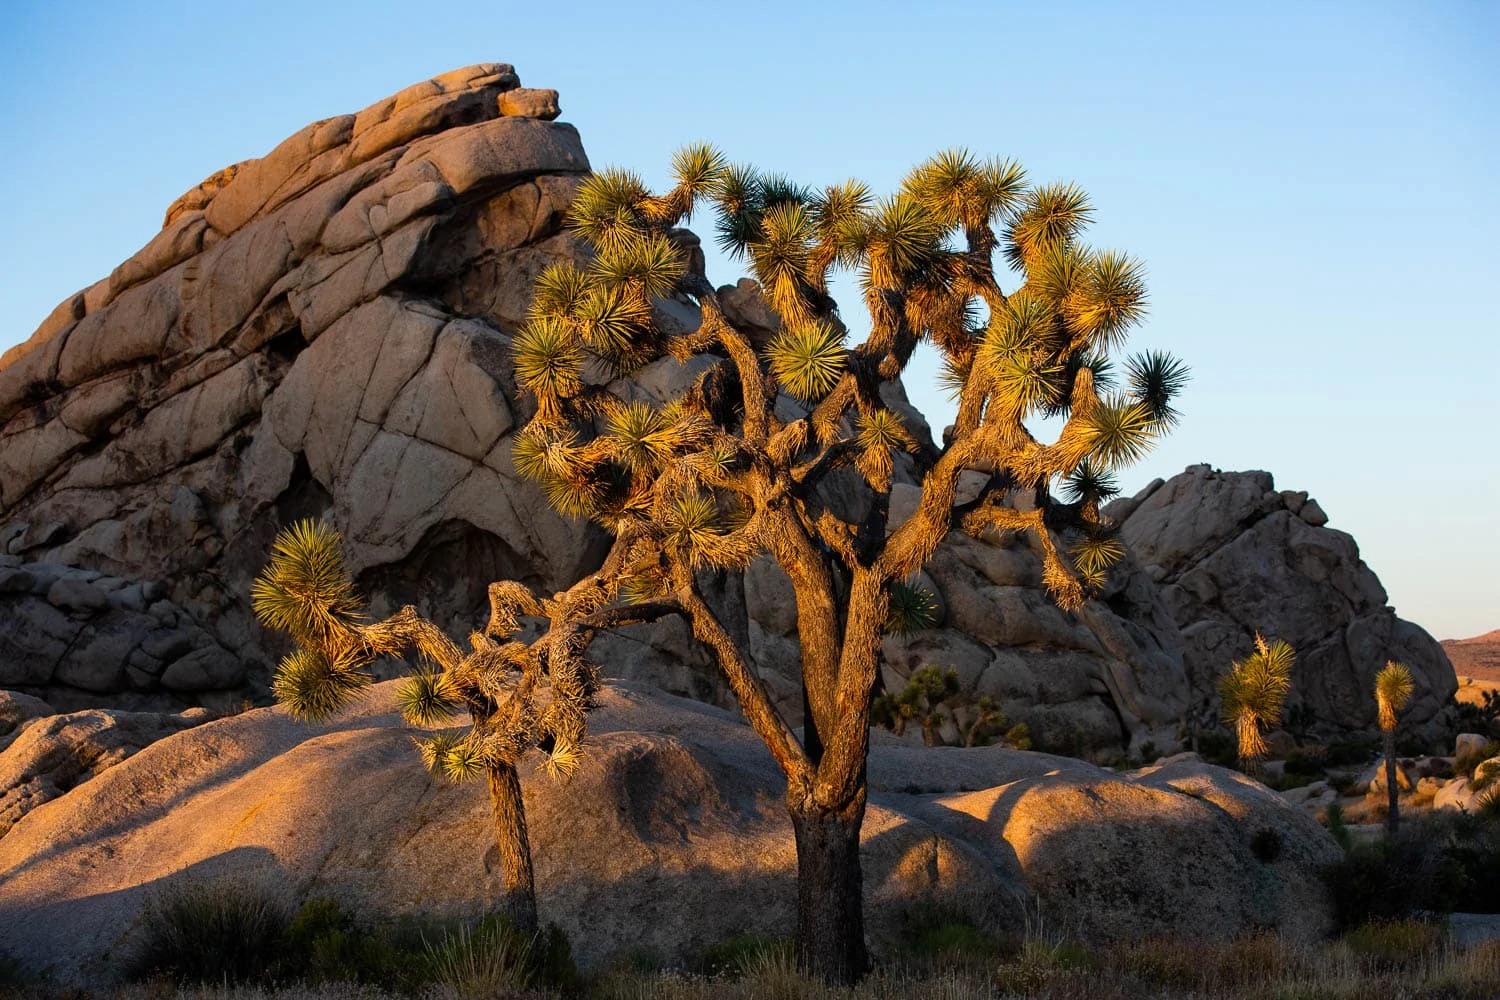 Gold sunset light hits a rock formation and joshua tree in Joshua Tree National Park.